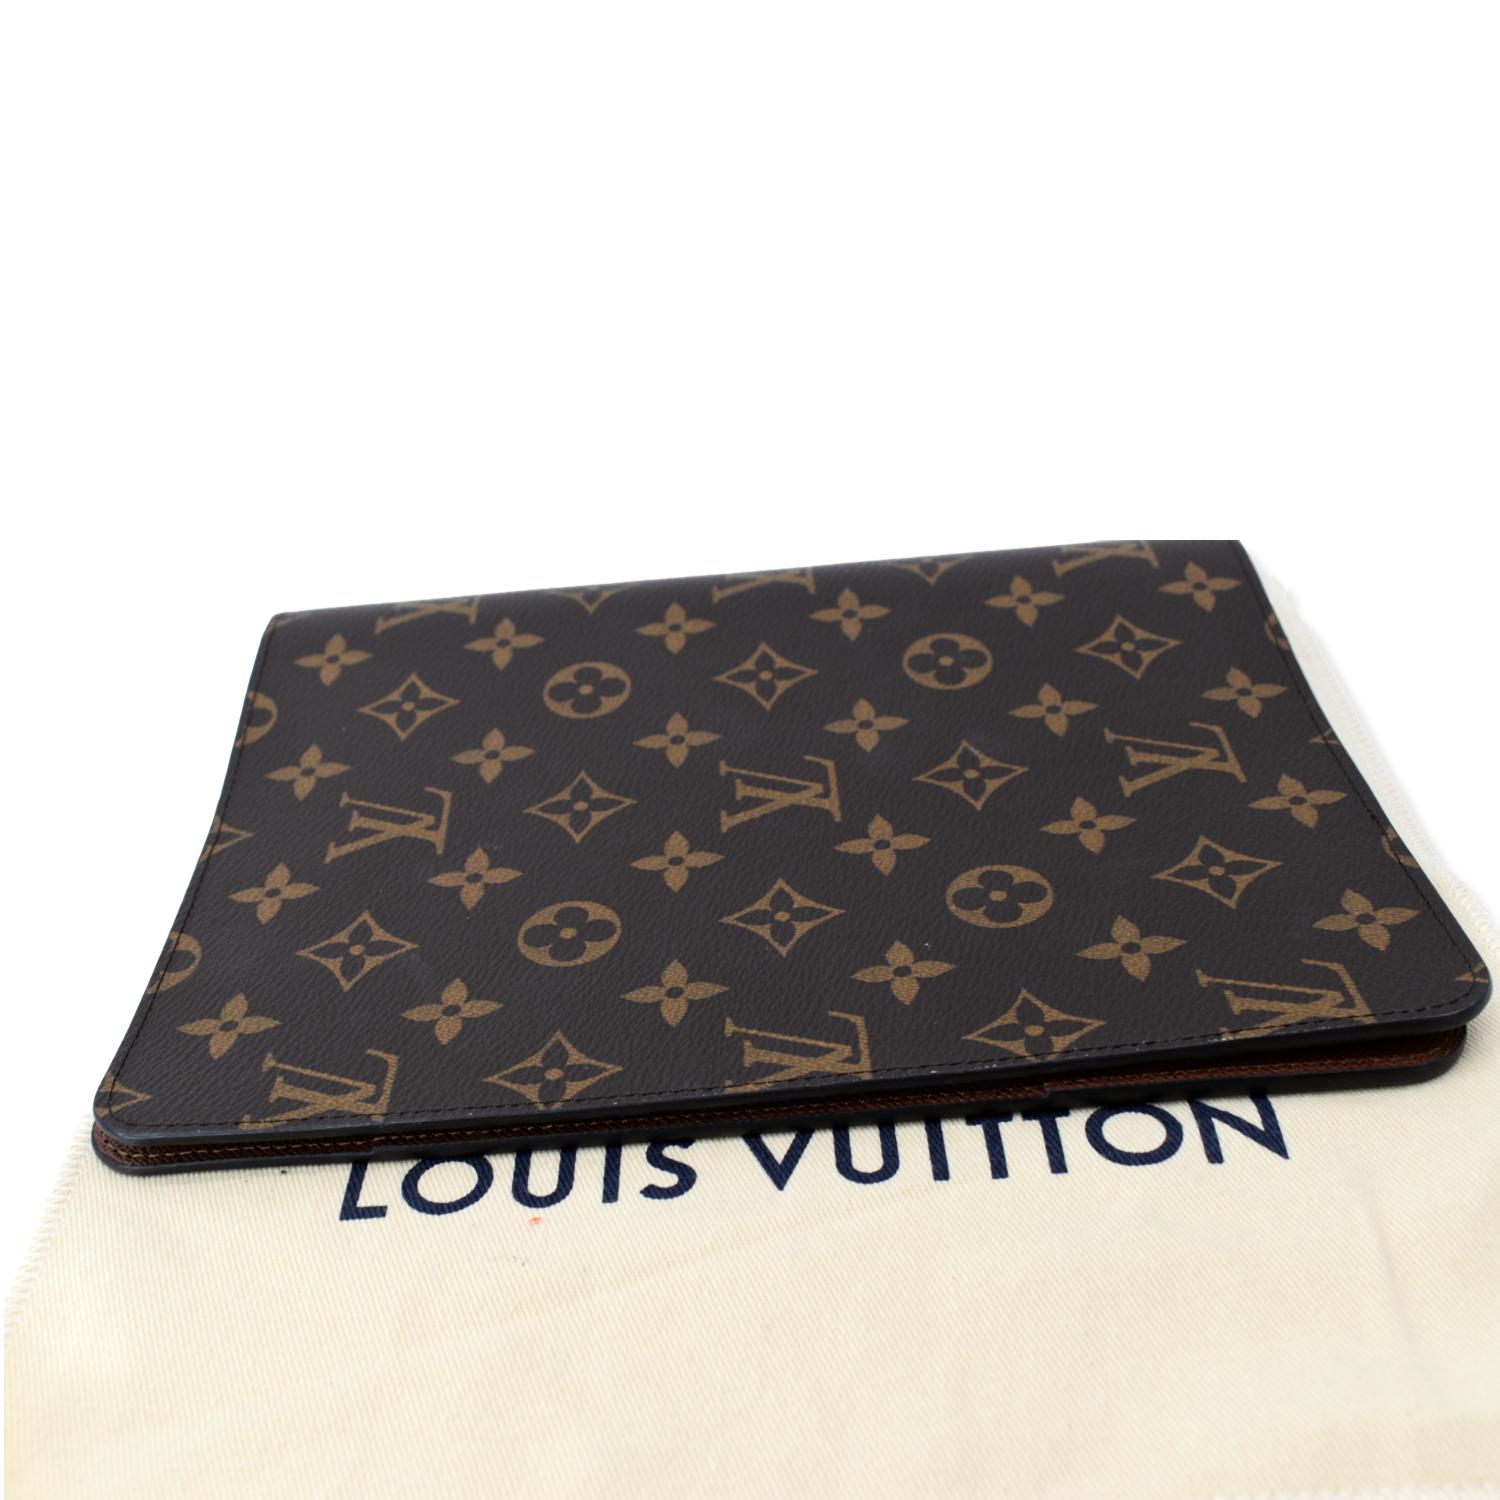 Louis Vuitton: A Pre-Owned Reference Guide: Thompson, Deanna:  9798362470821: : Books